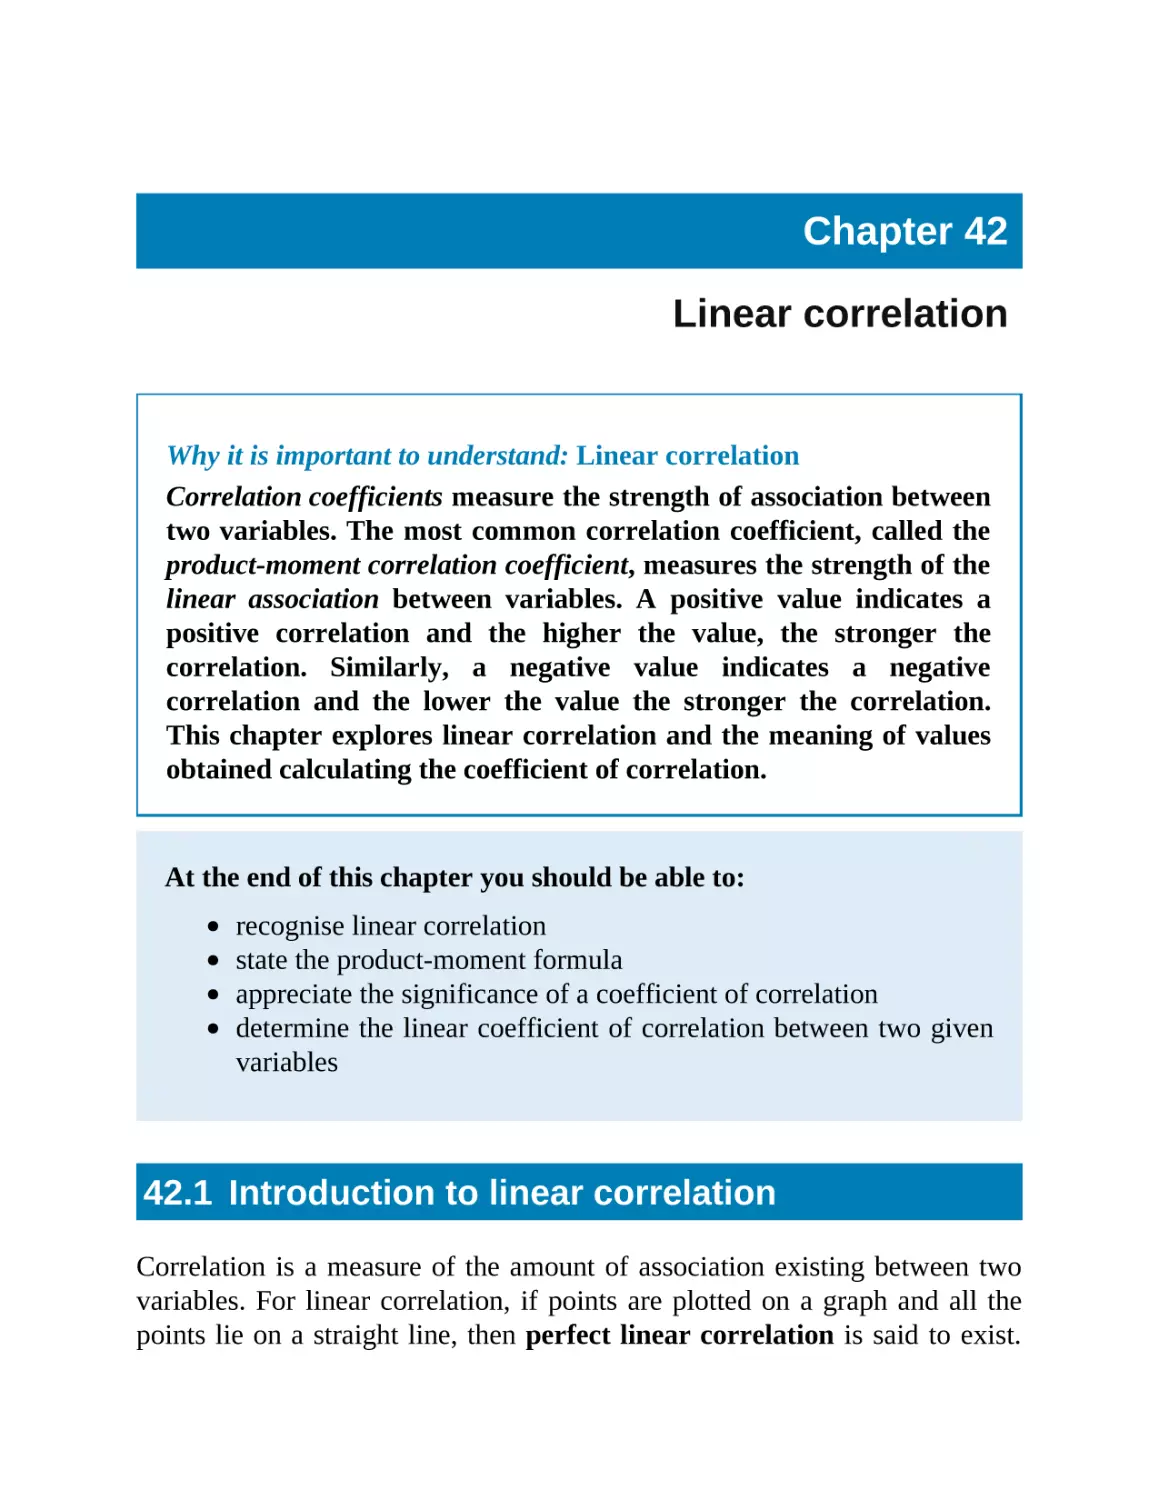 42 Linear correlation
42.1 Introduction to linear correlation